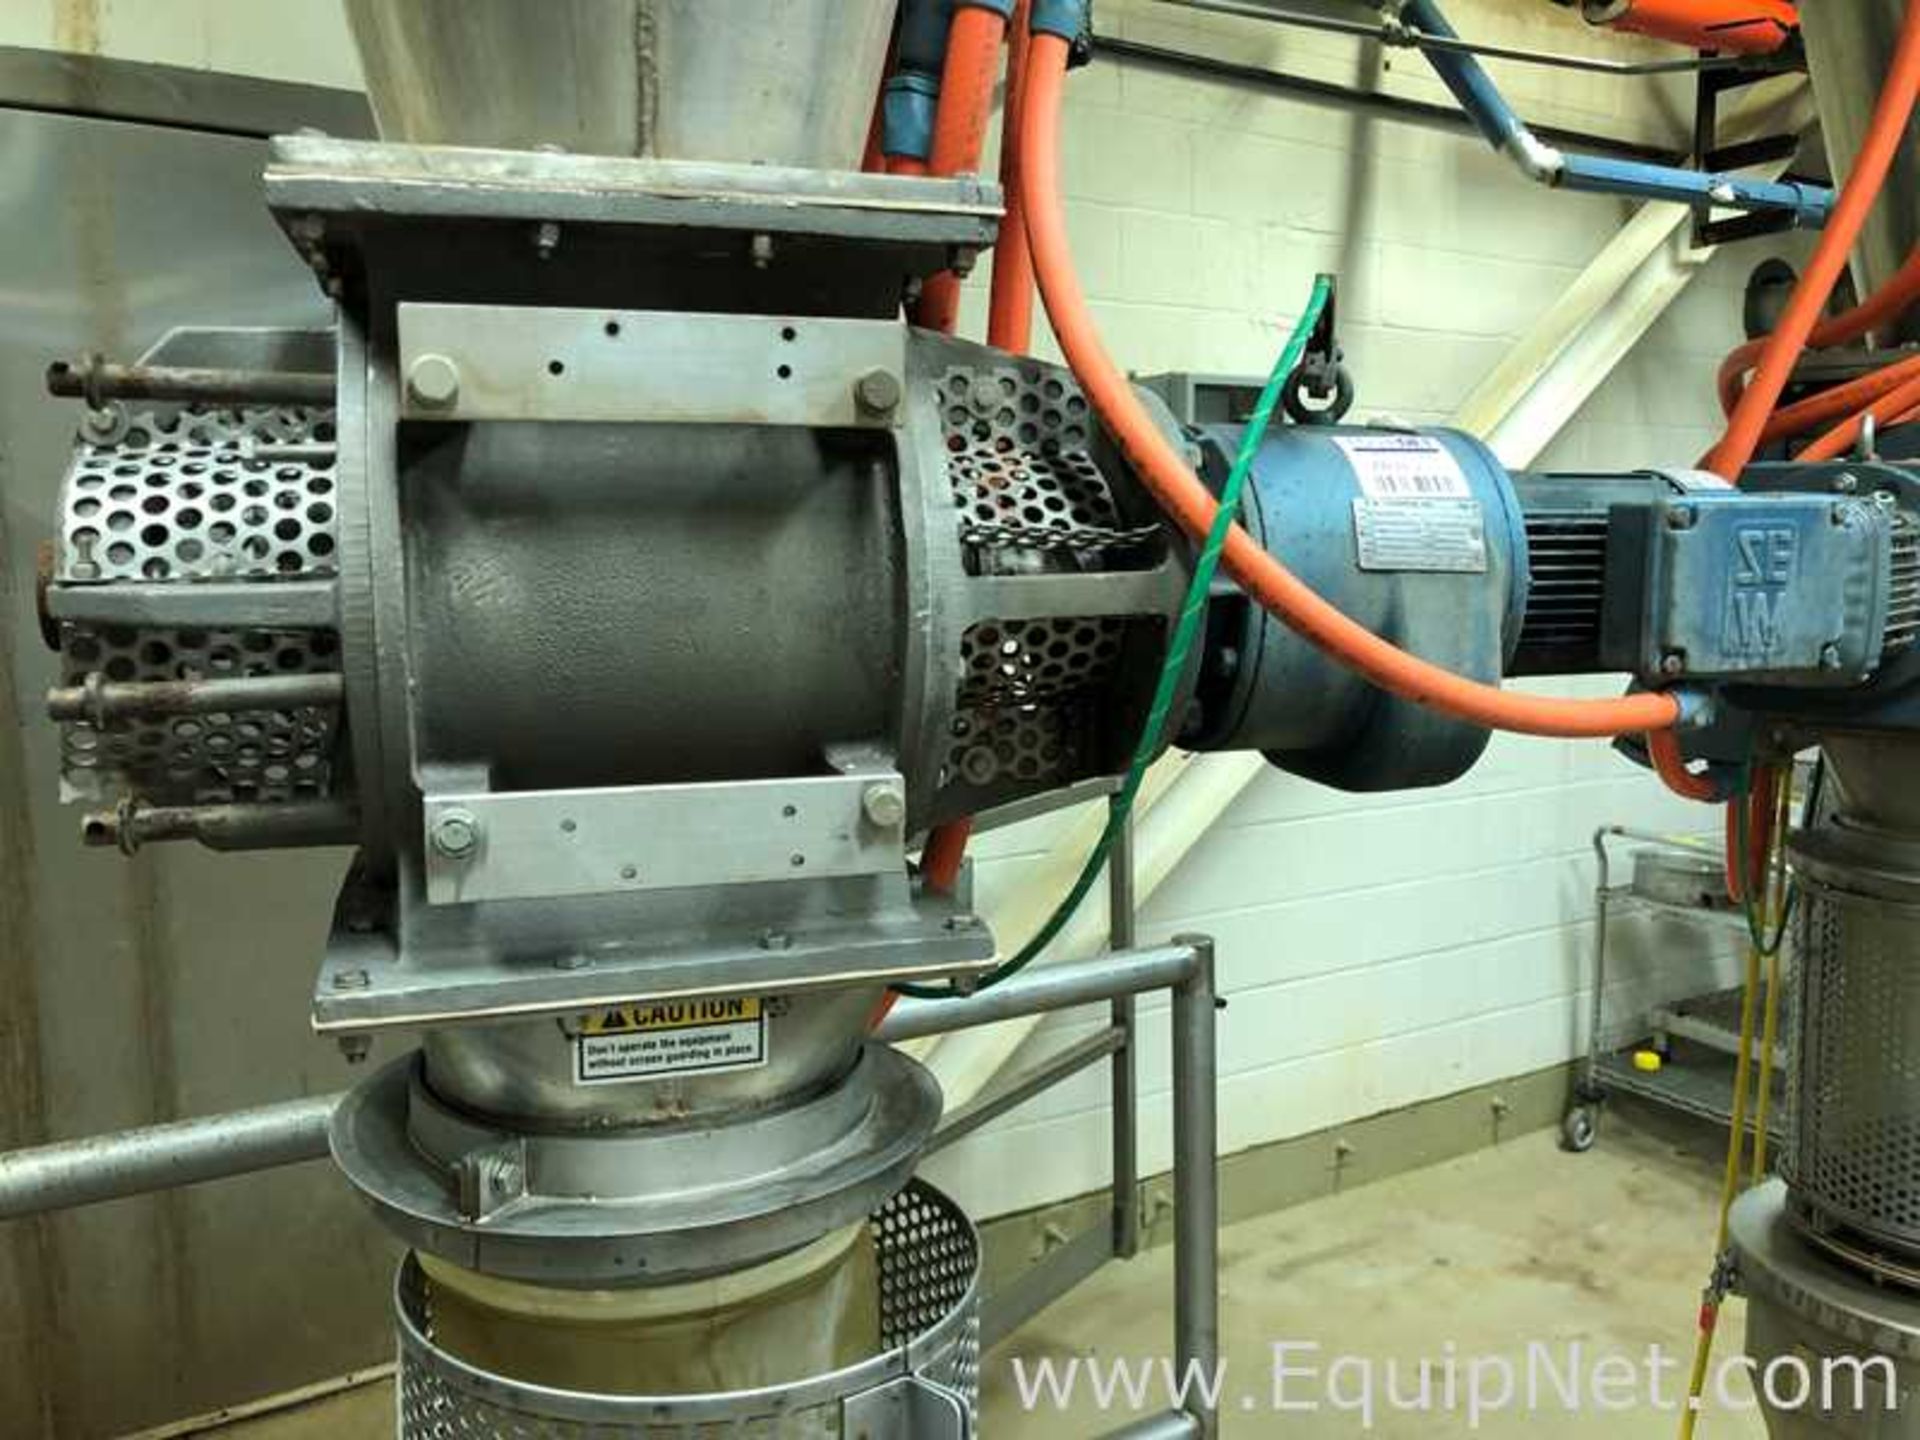 One Vacuum Conveyor System Vac-U-Max With Hopper And One Rotary Valve - Image 8 of 10